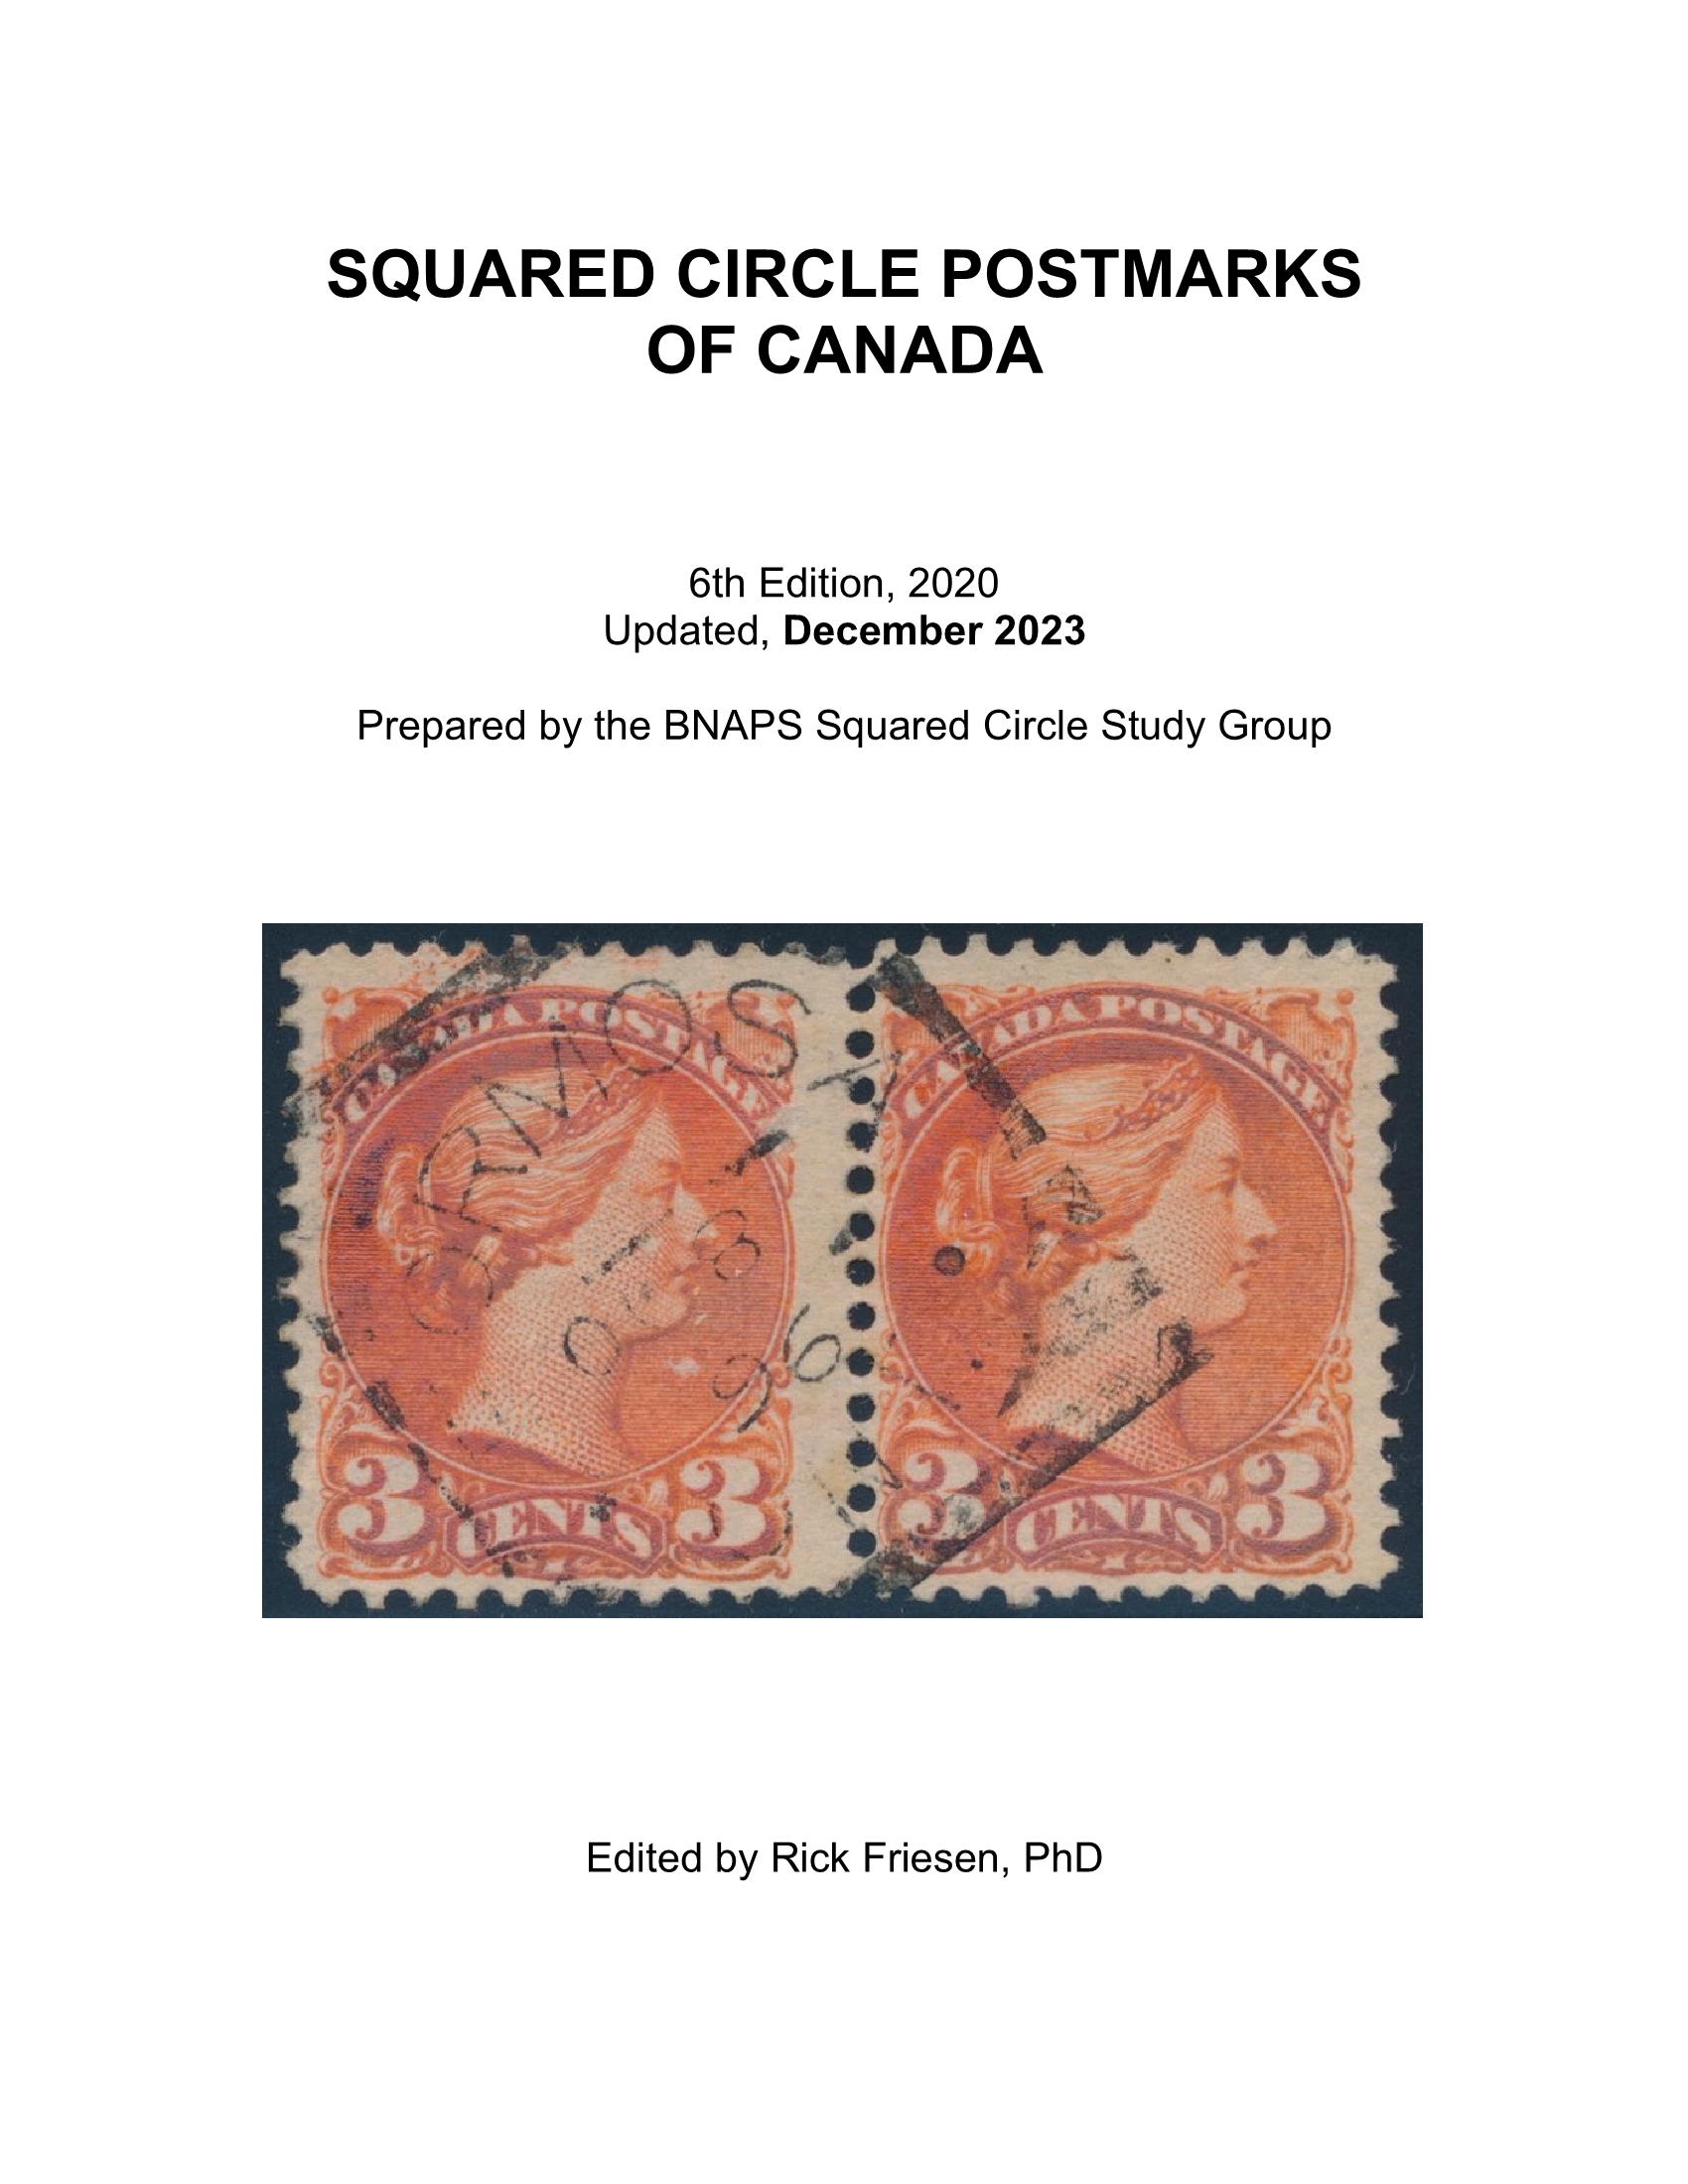 Cover of the book Squared Circle Postmarks of Canada 6th edition